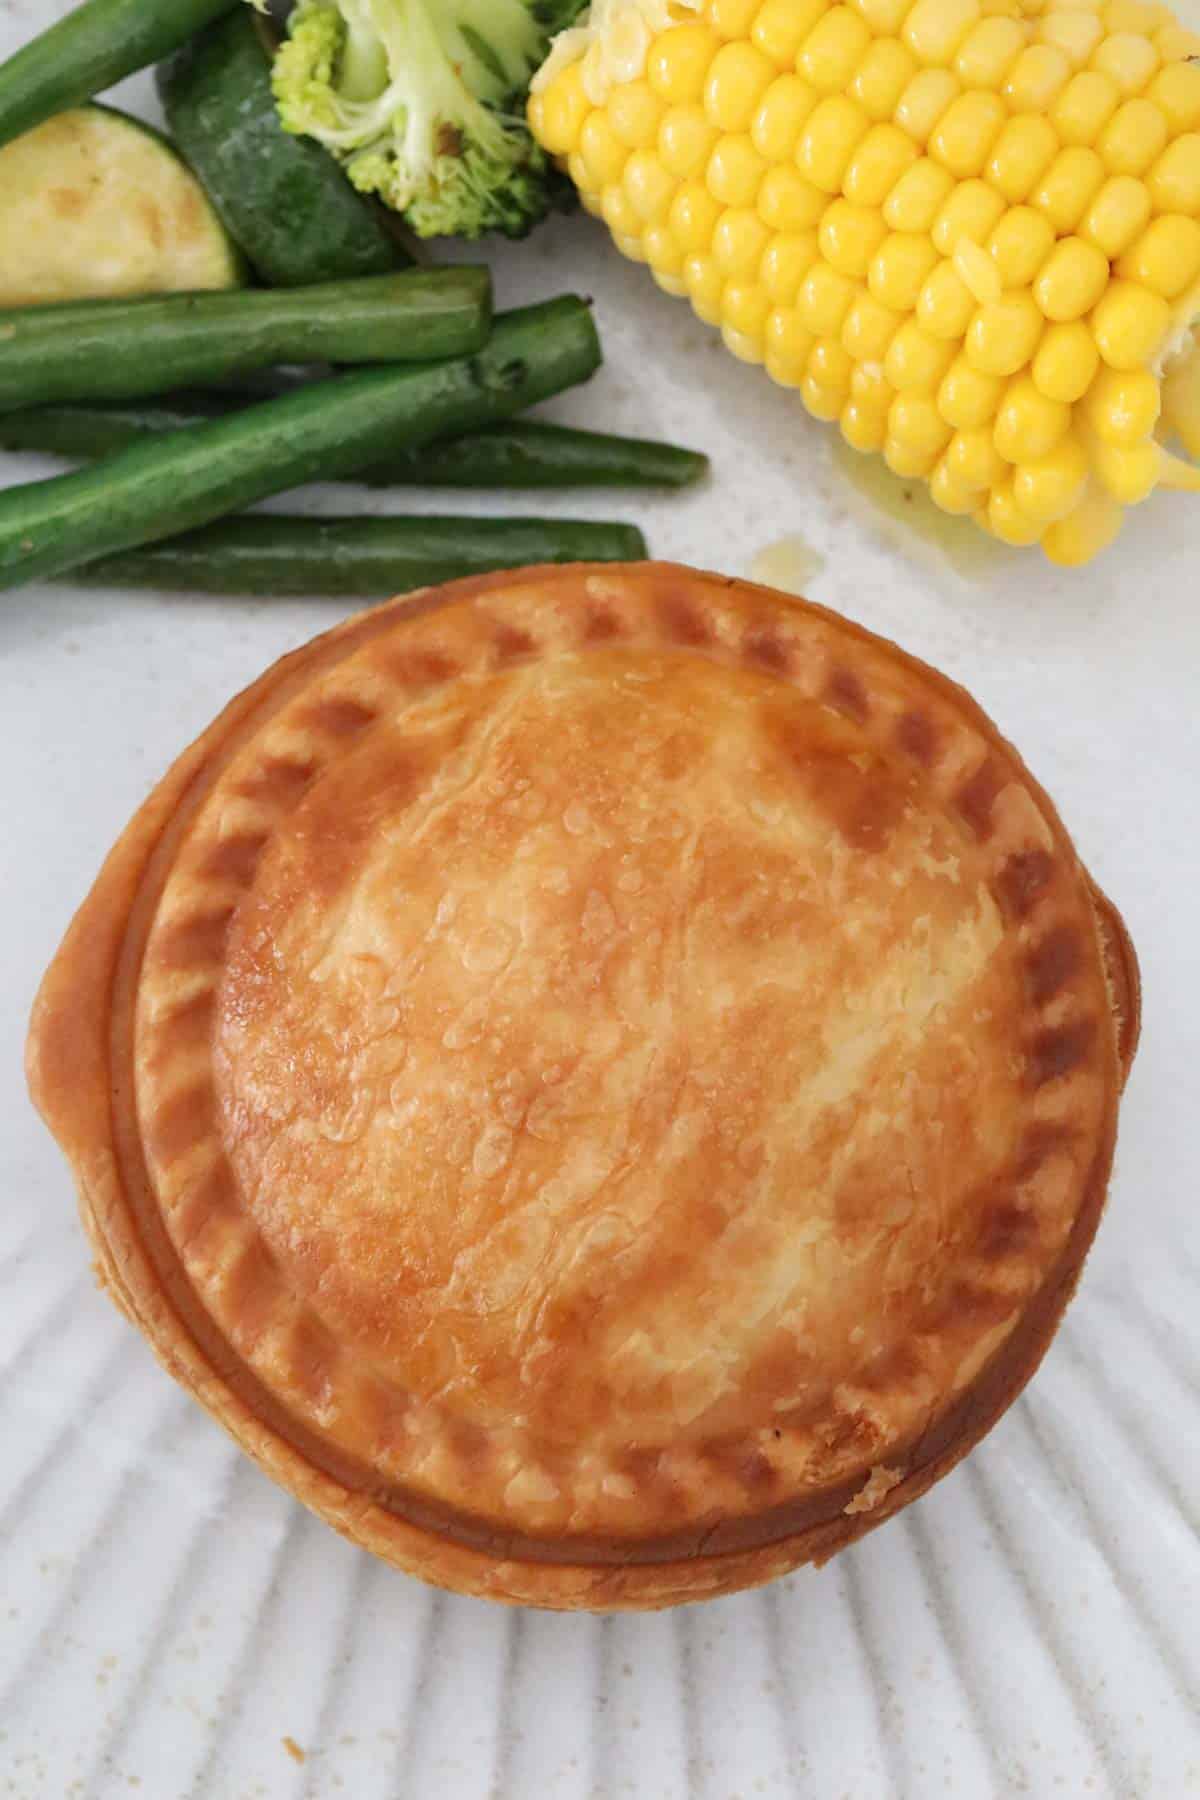 A crunchy pastry pie cooked in the pie maker.